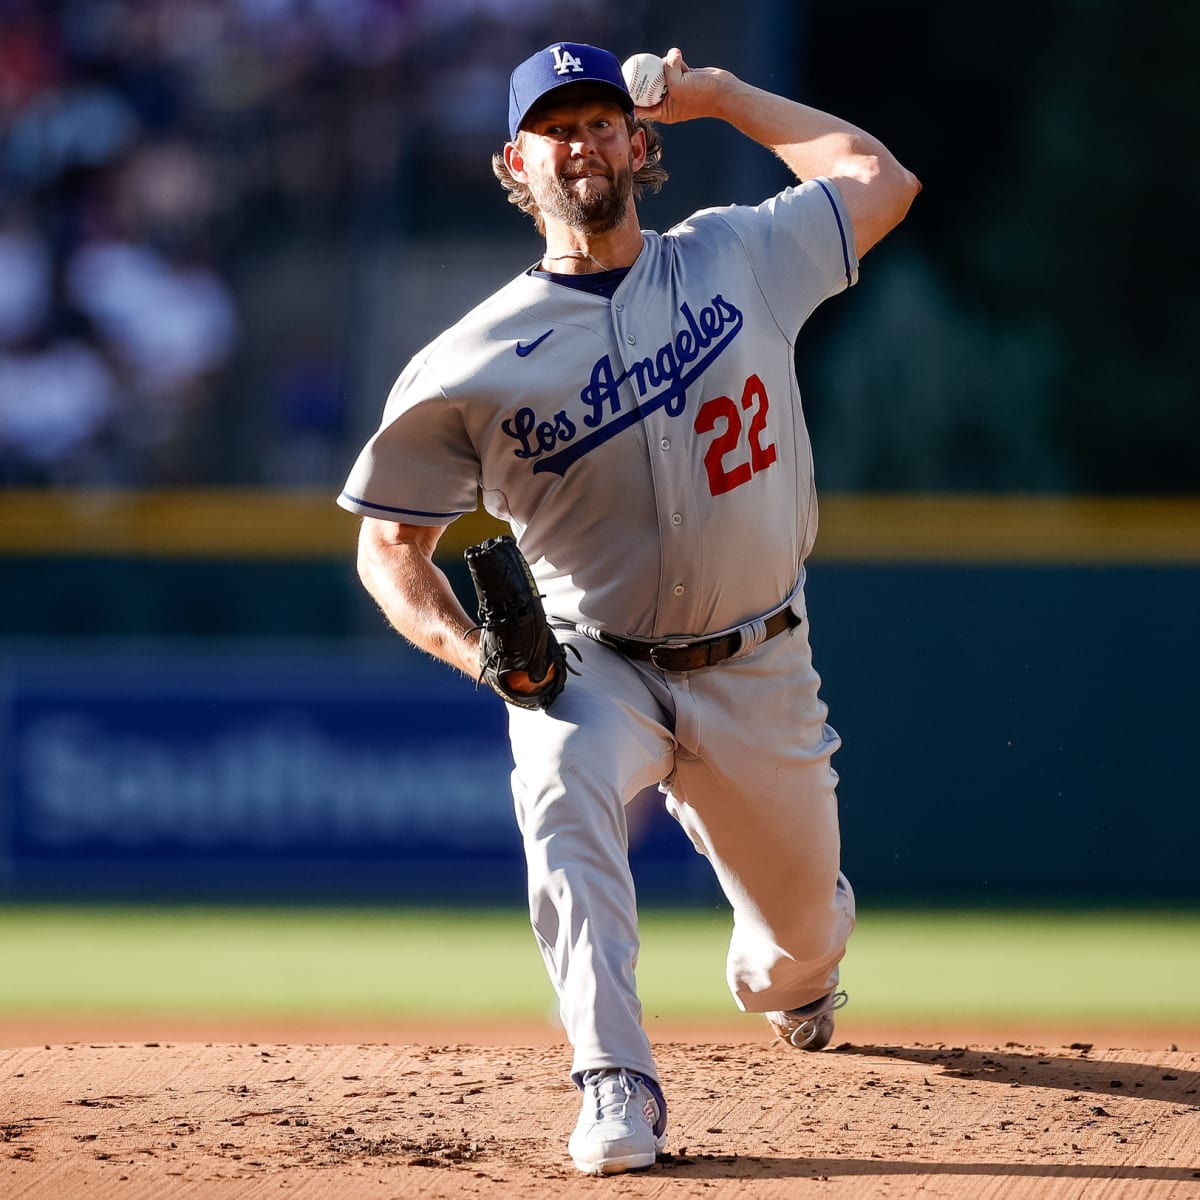 Clayton Kershaw Will Not Start Opening Day for Dodgers, Manager Says